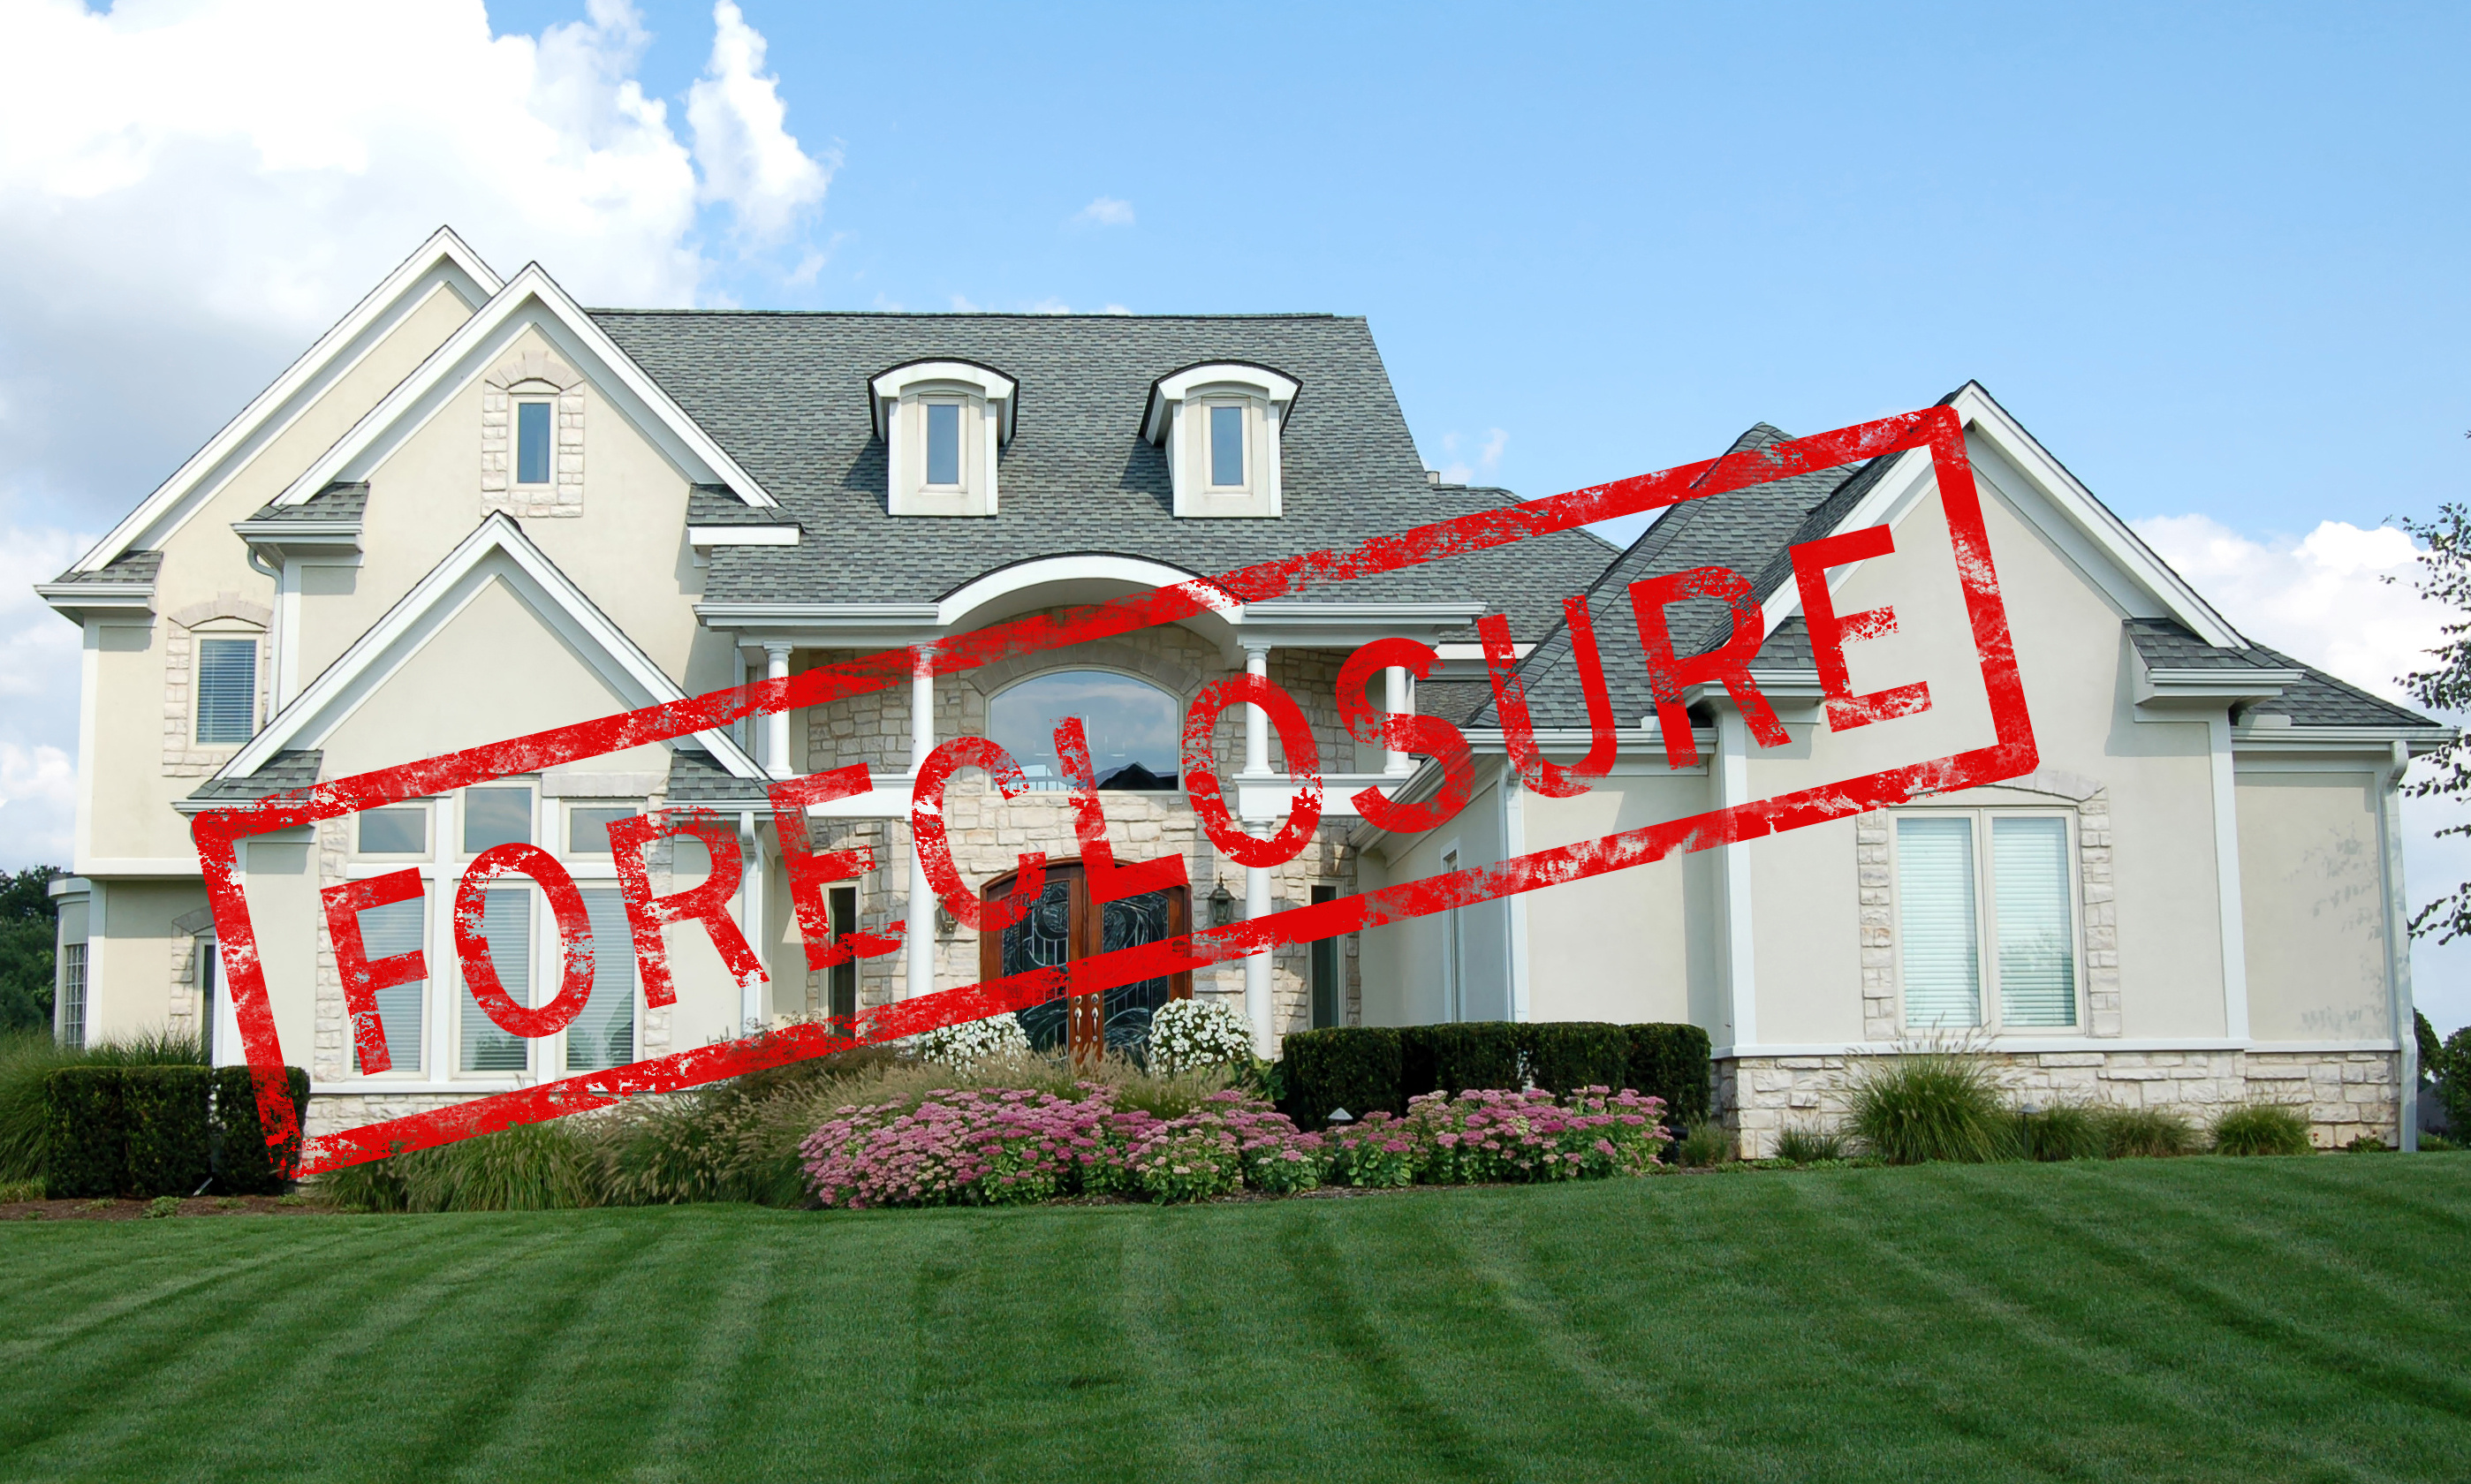 Call Chandler Real Estate Services, LLC to order appraisals regarding Worcester foreclosures